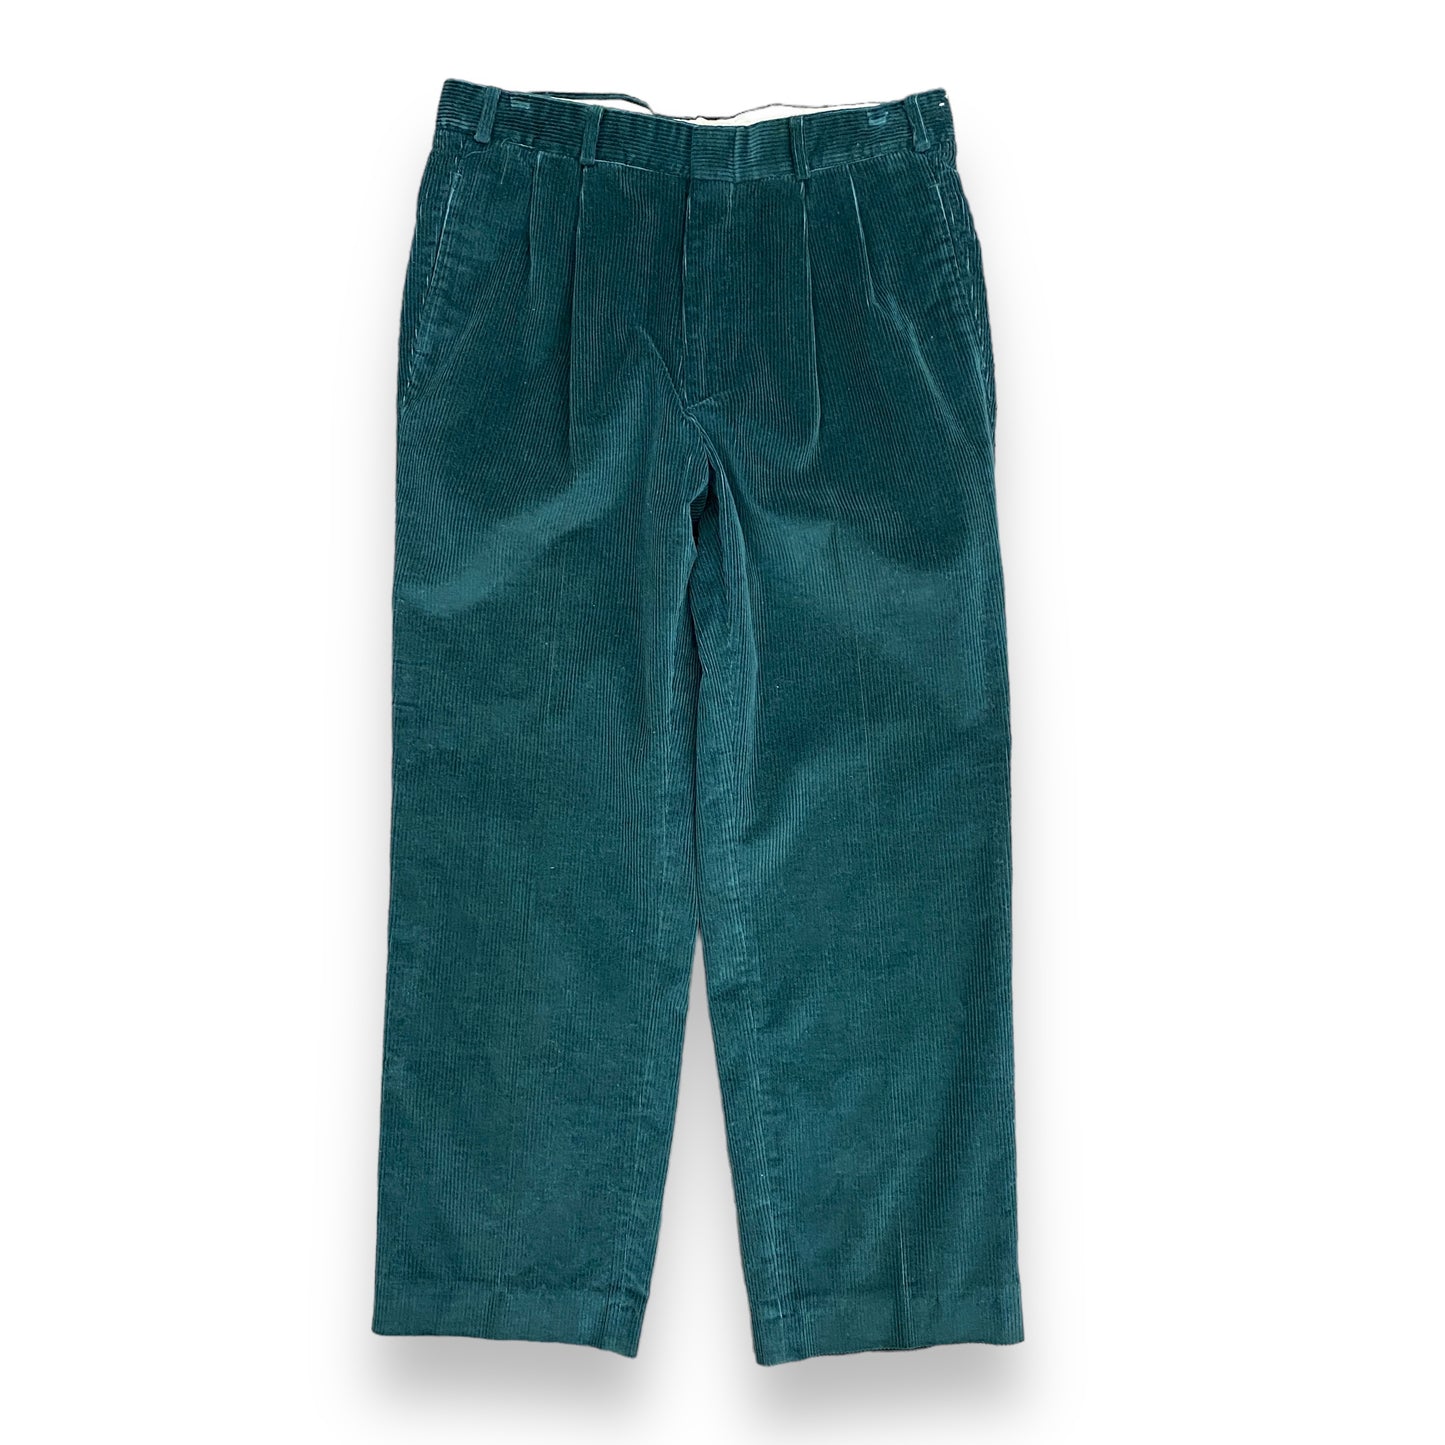 Vintage 90s Forest Green Pleated Corduroy Pants - 34"x28"